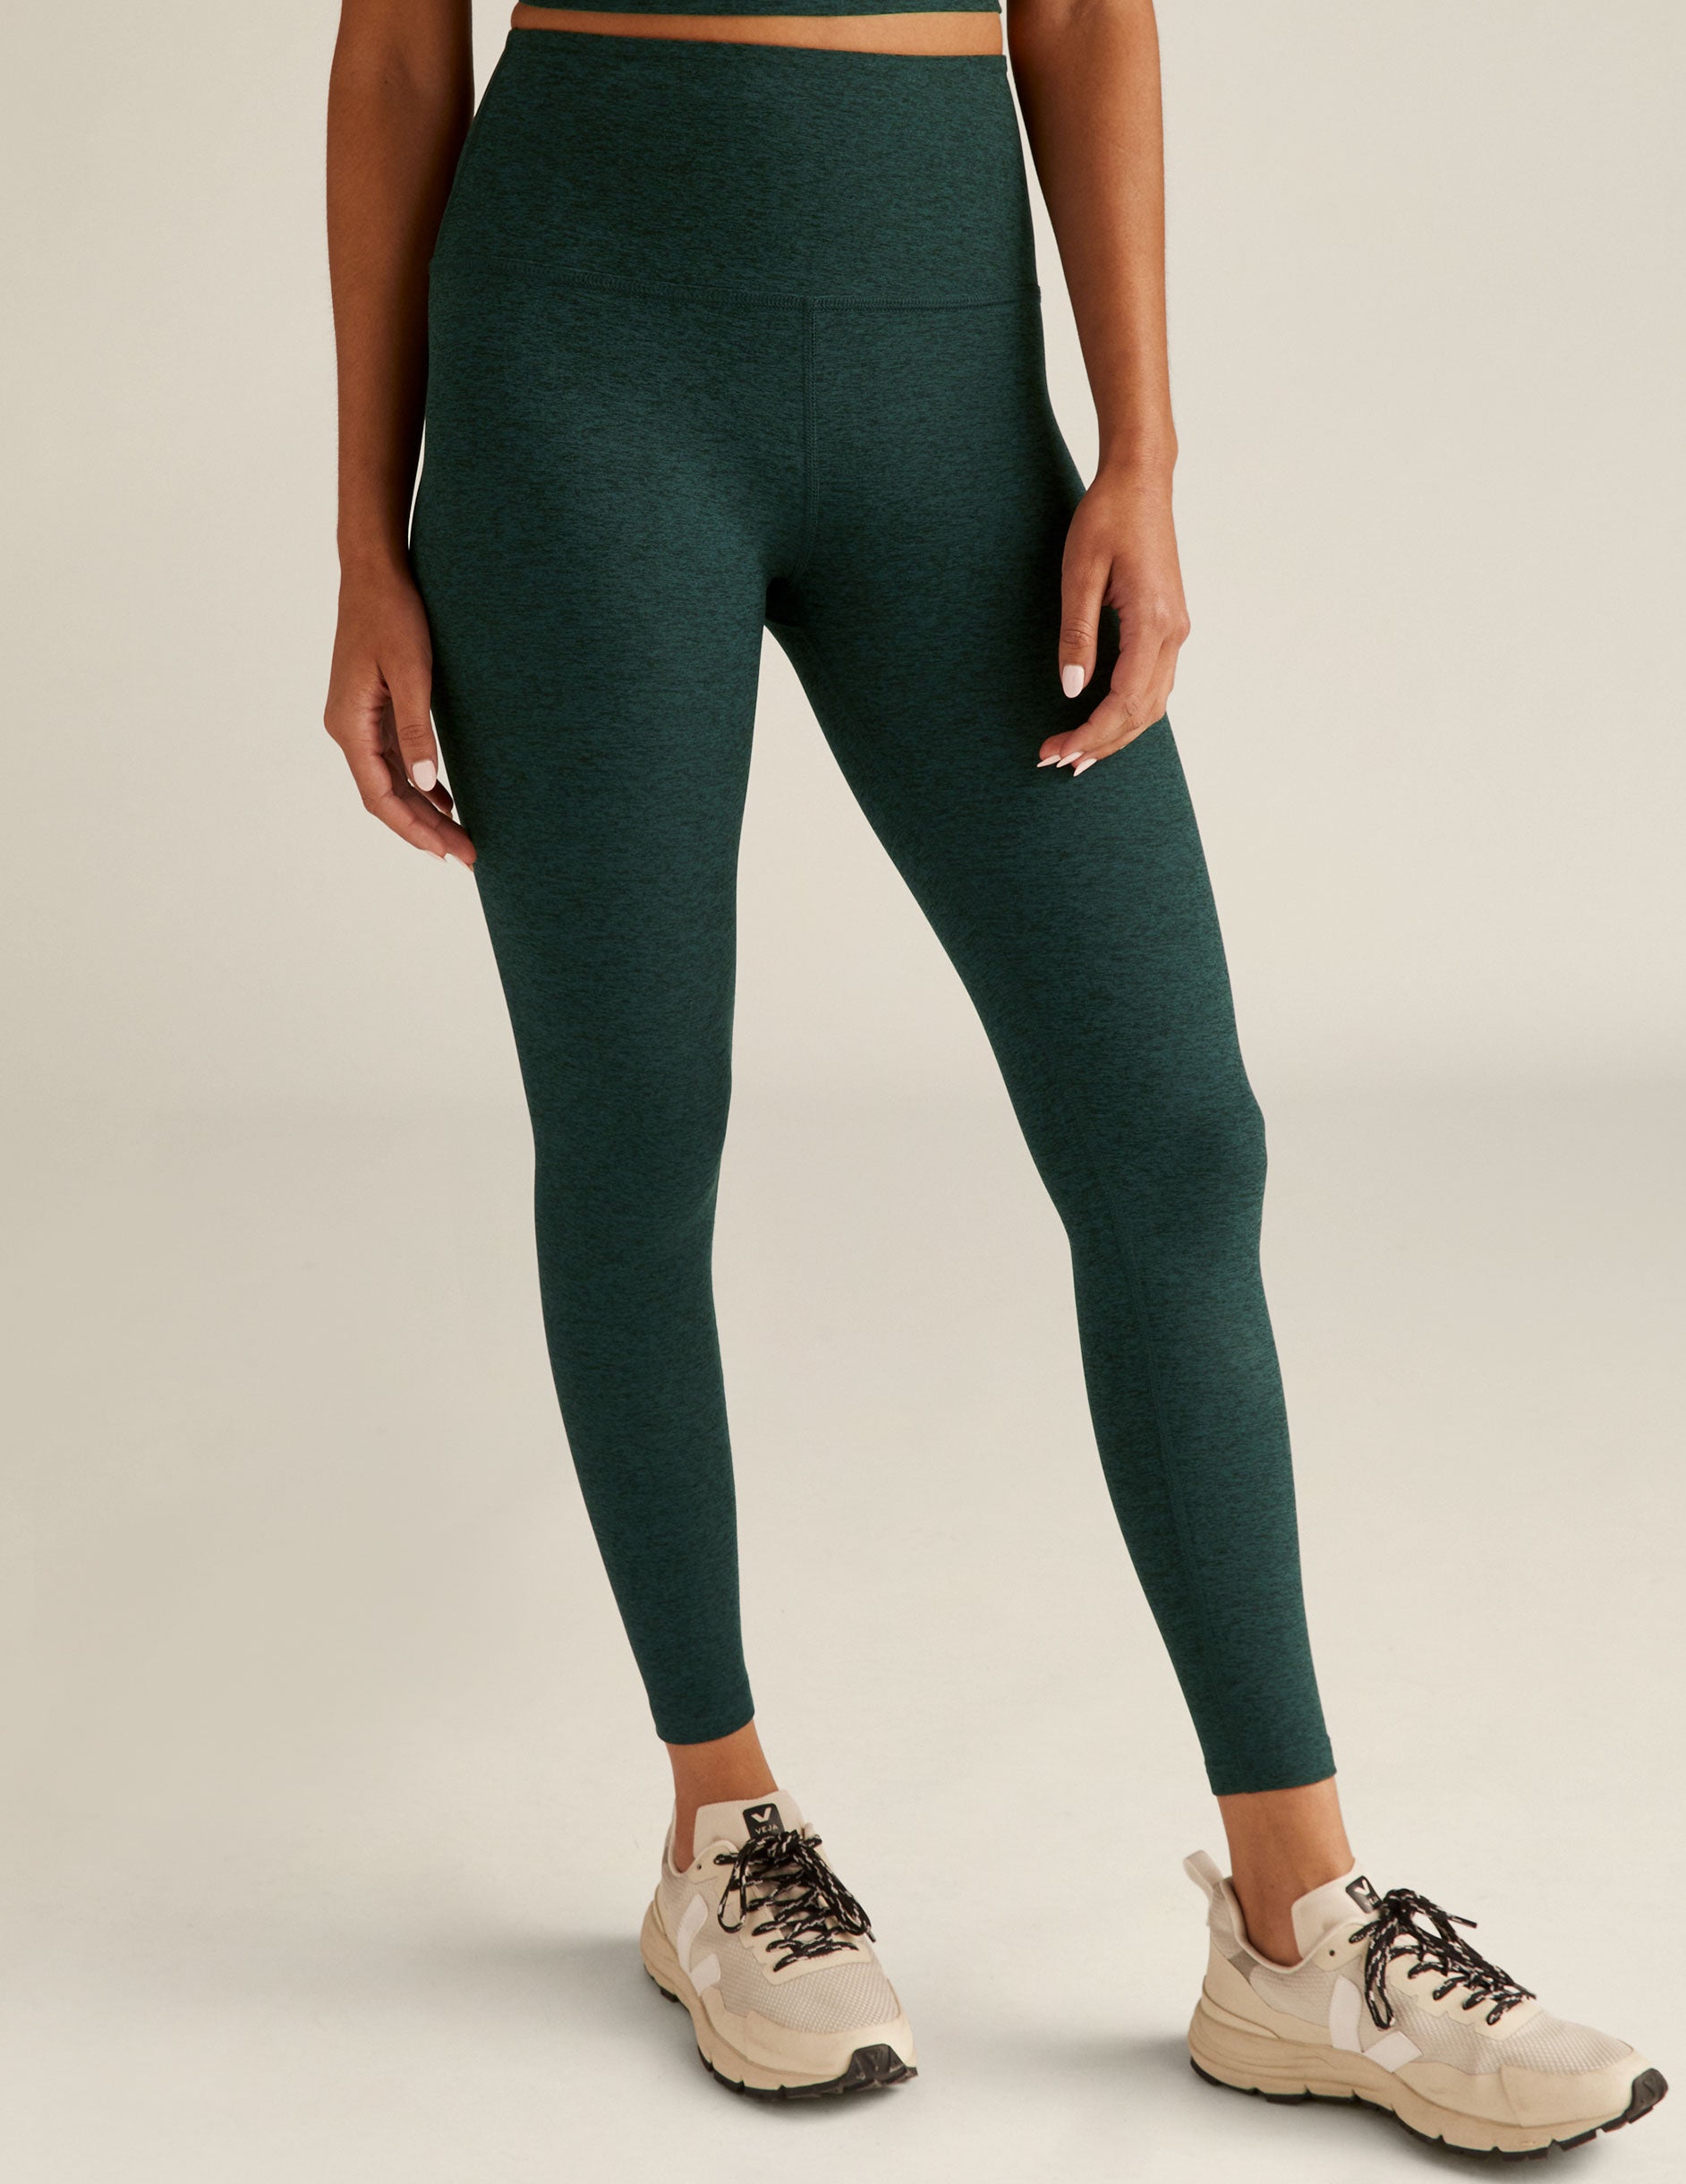 Buy Beyond Yoga Plus Size High Waisted Midi Leggings for Women - Soft  Fabrication with High-Rise Elastic Waistband, Vetiver Green/Pine, 3X at